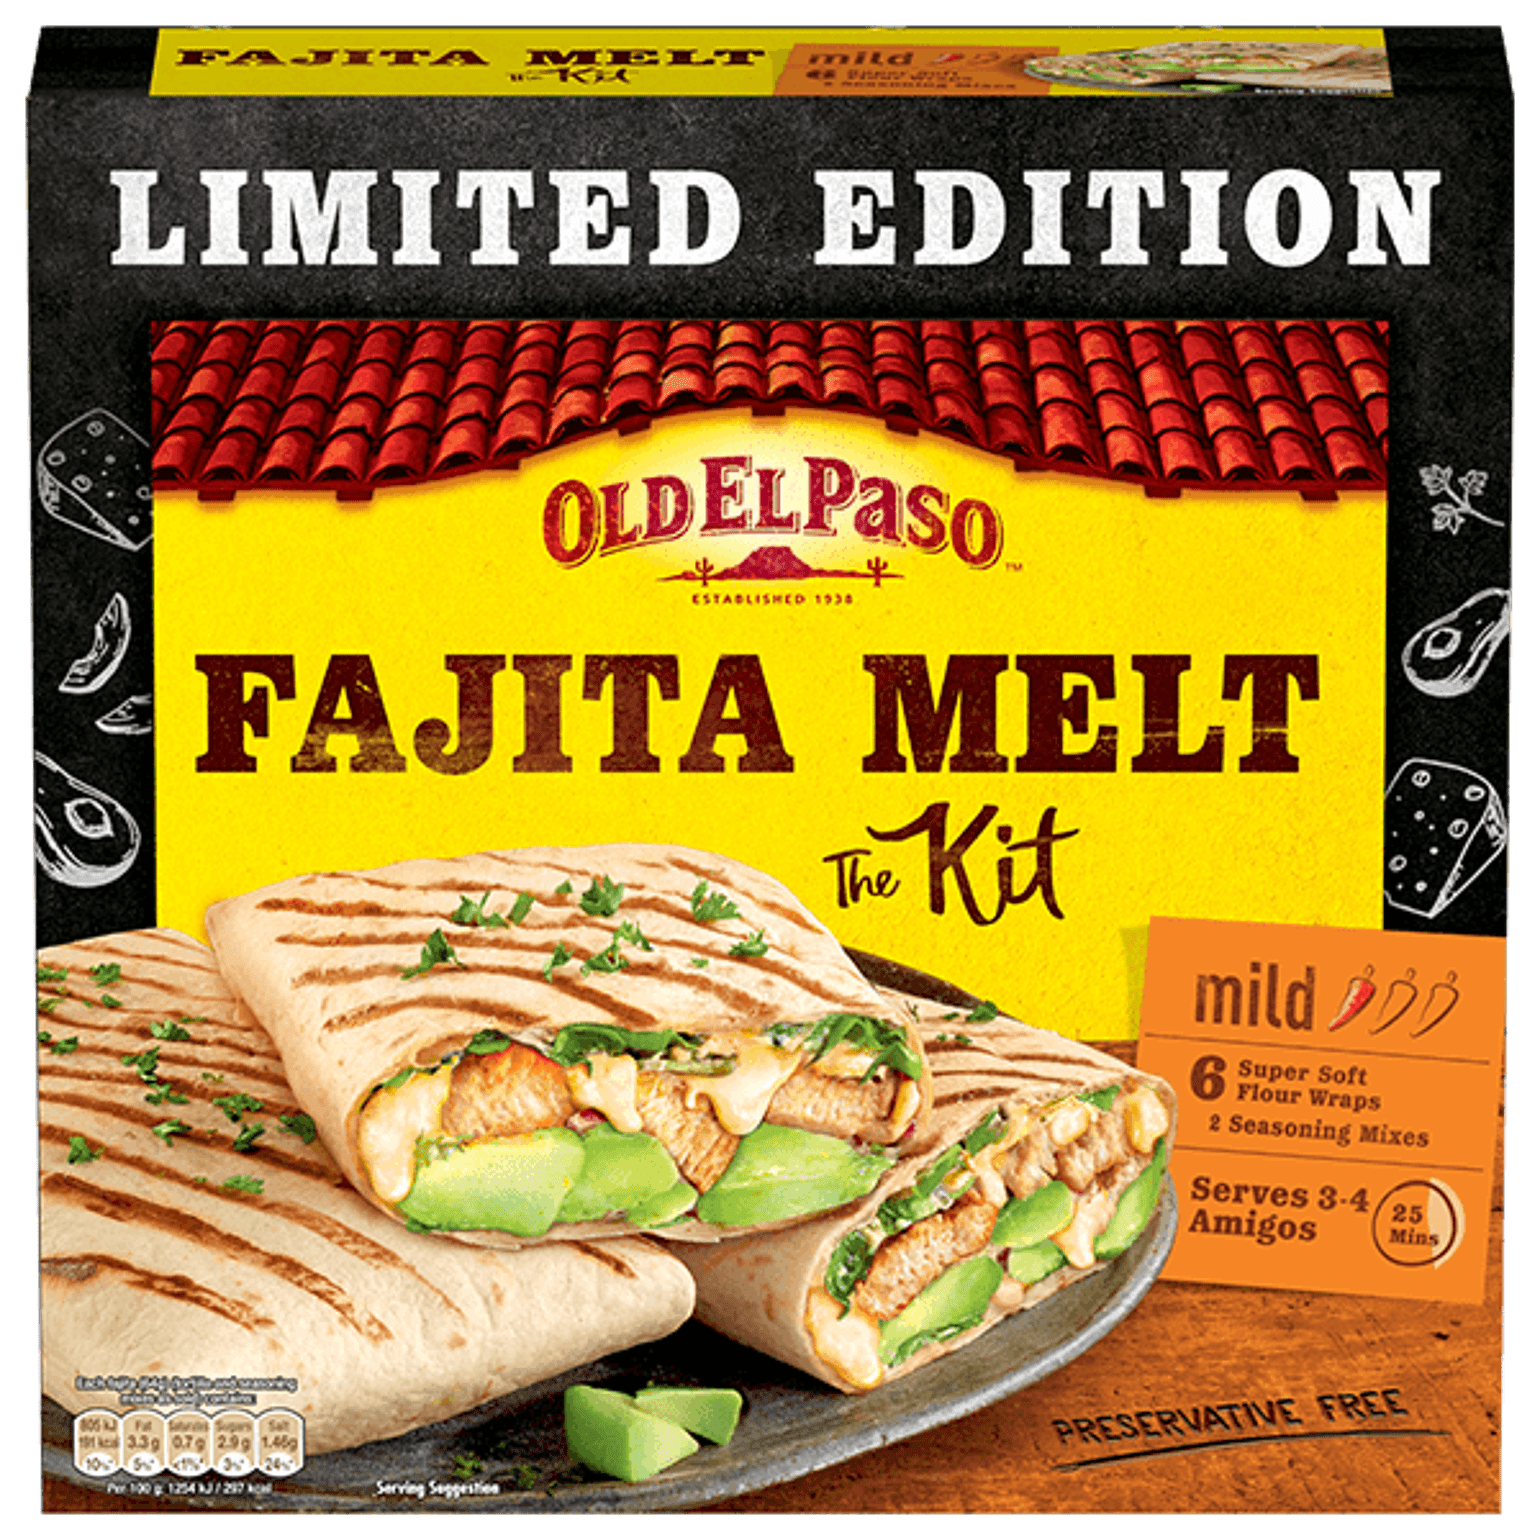 pack of Old El Paso's Mexican limited edition Fajita Melt Kit containing 6 extra soft tortillas wraps, 1 spice mix and 1 cheesy sauce mix (385g)